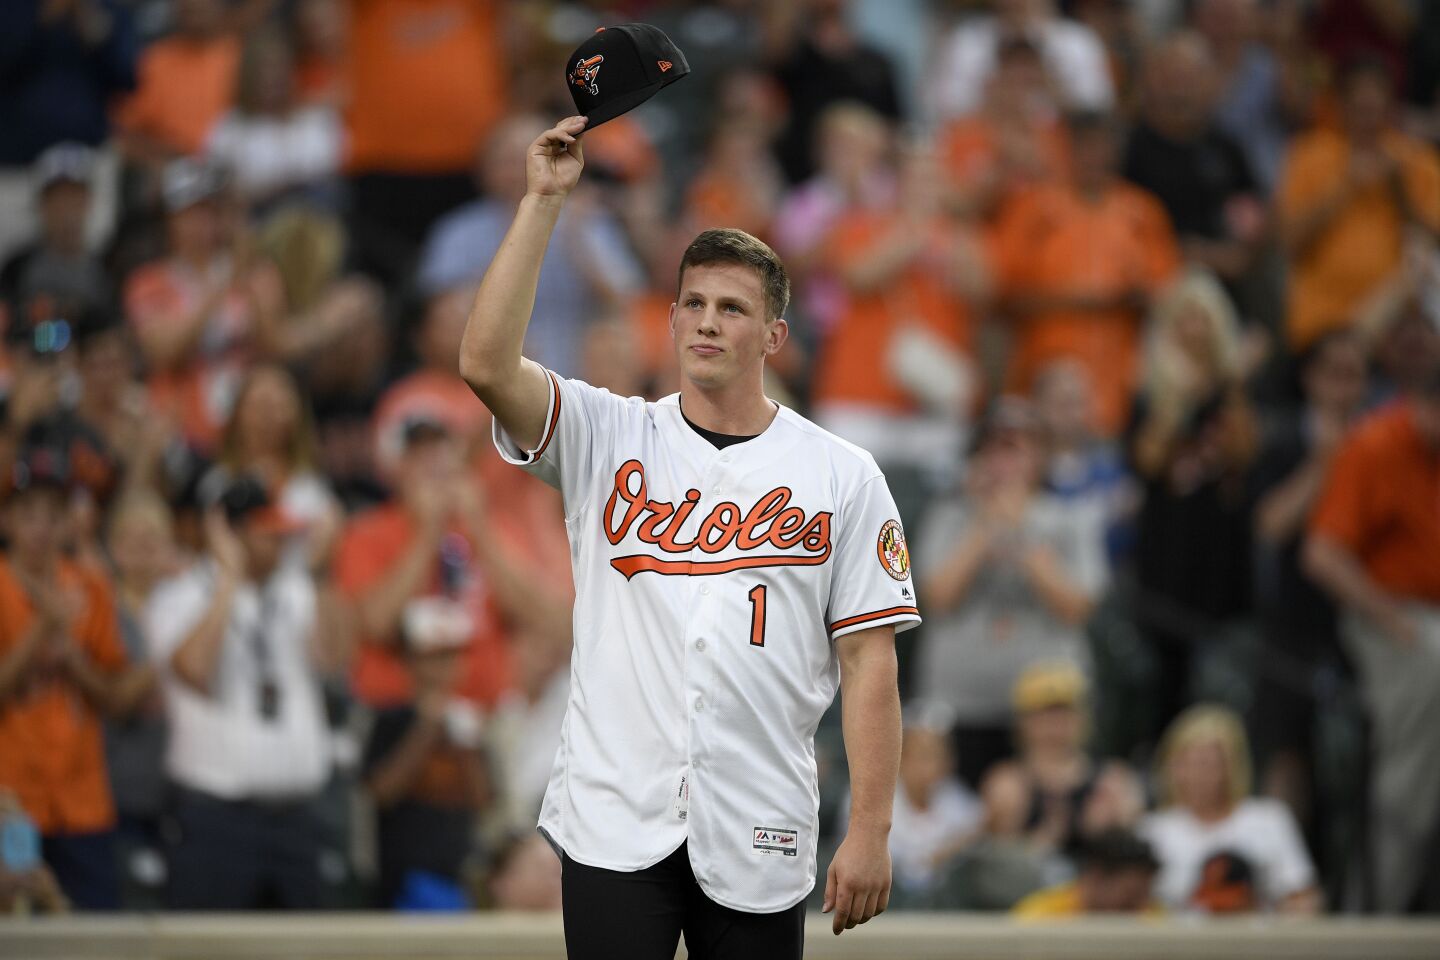 30 | Baltimore Orioles (52-110, 5th in AL East)Speaking of the CBA, the players’ overhaul wasn’t going to move the Orioles, coming off their sixth-worst season ever (.321 winning percentage), off their plan to tank to fill the farm system.